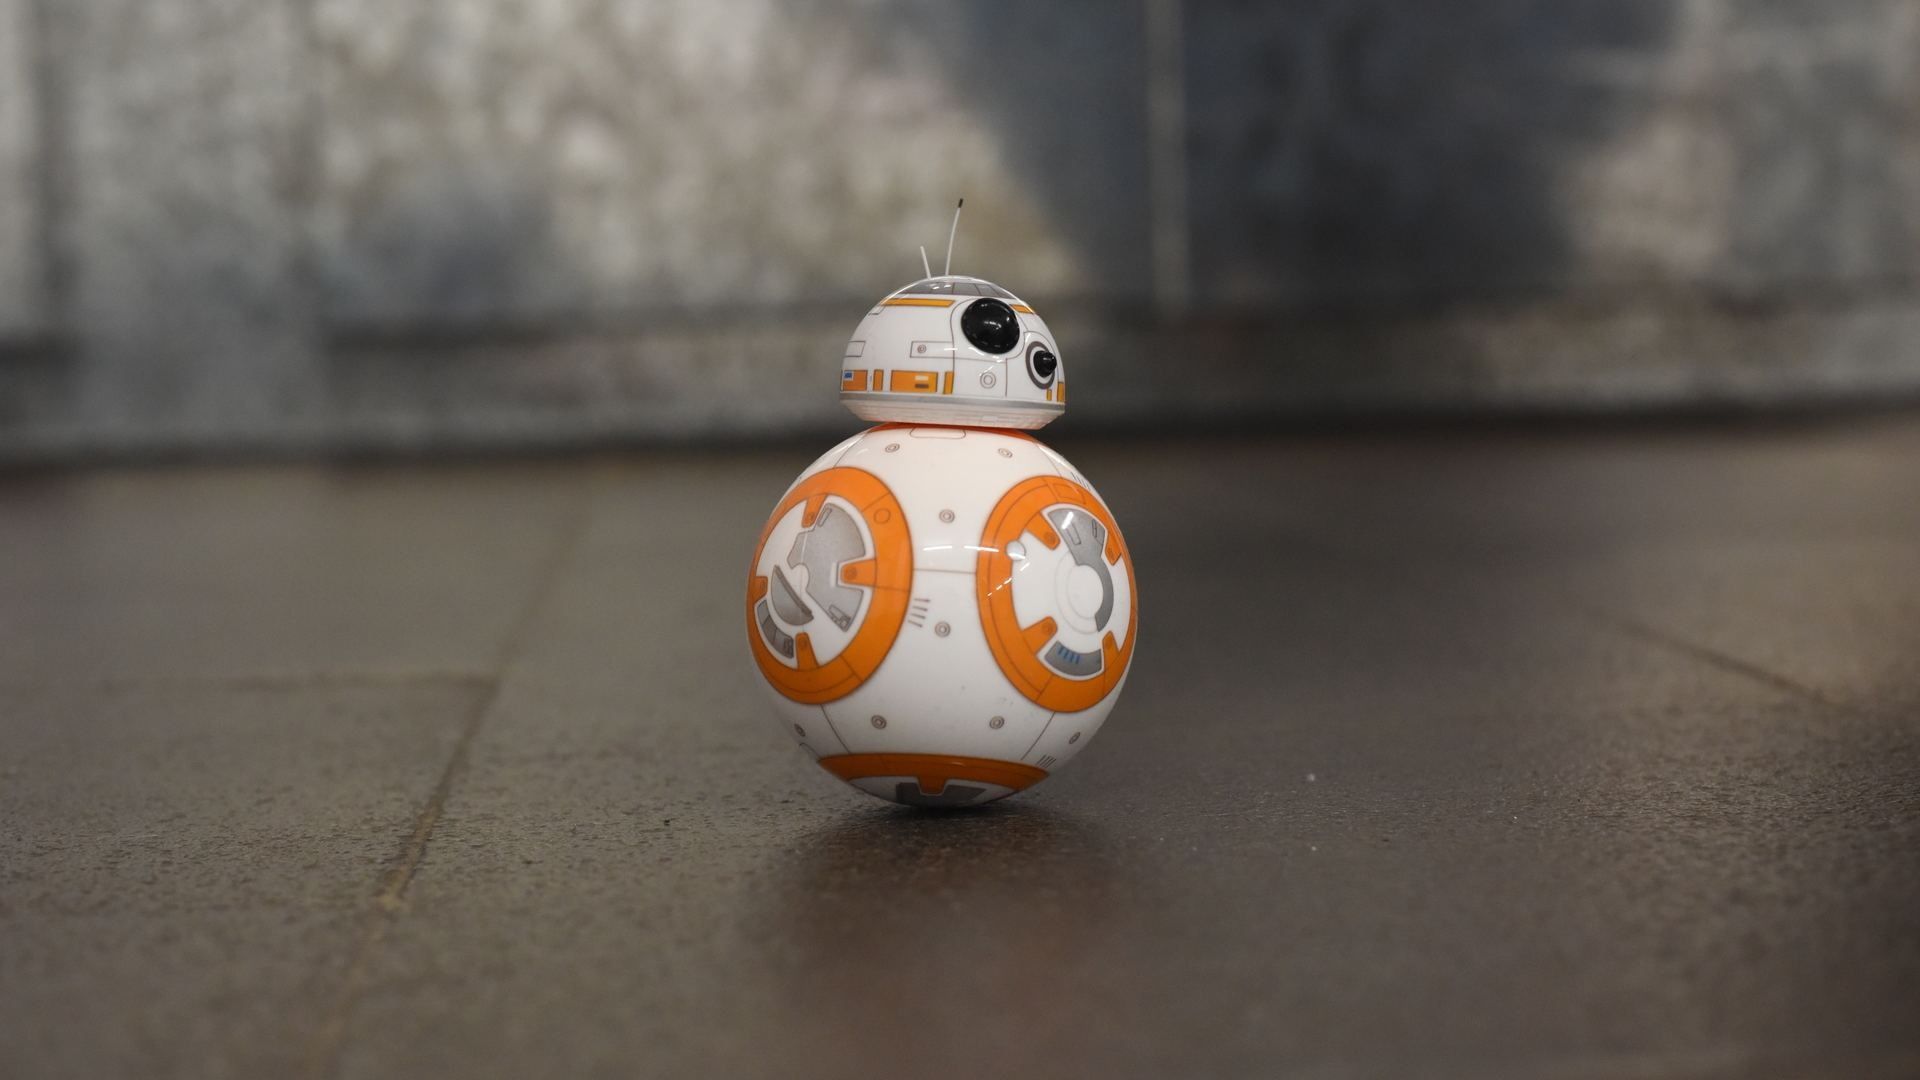 Wallpaper BB8 robot, toy, Star Wars 1920x1080 Full HD 2K Picture, Image